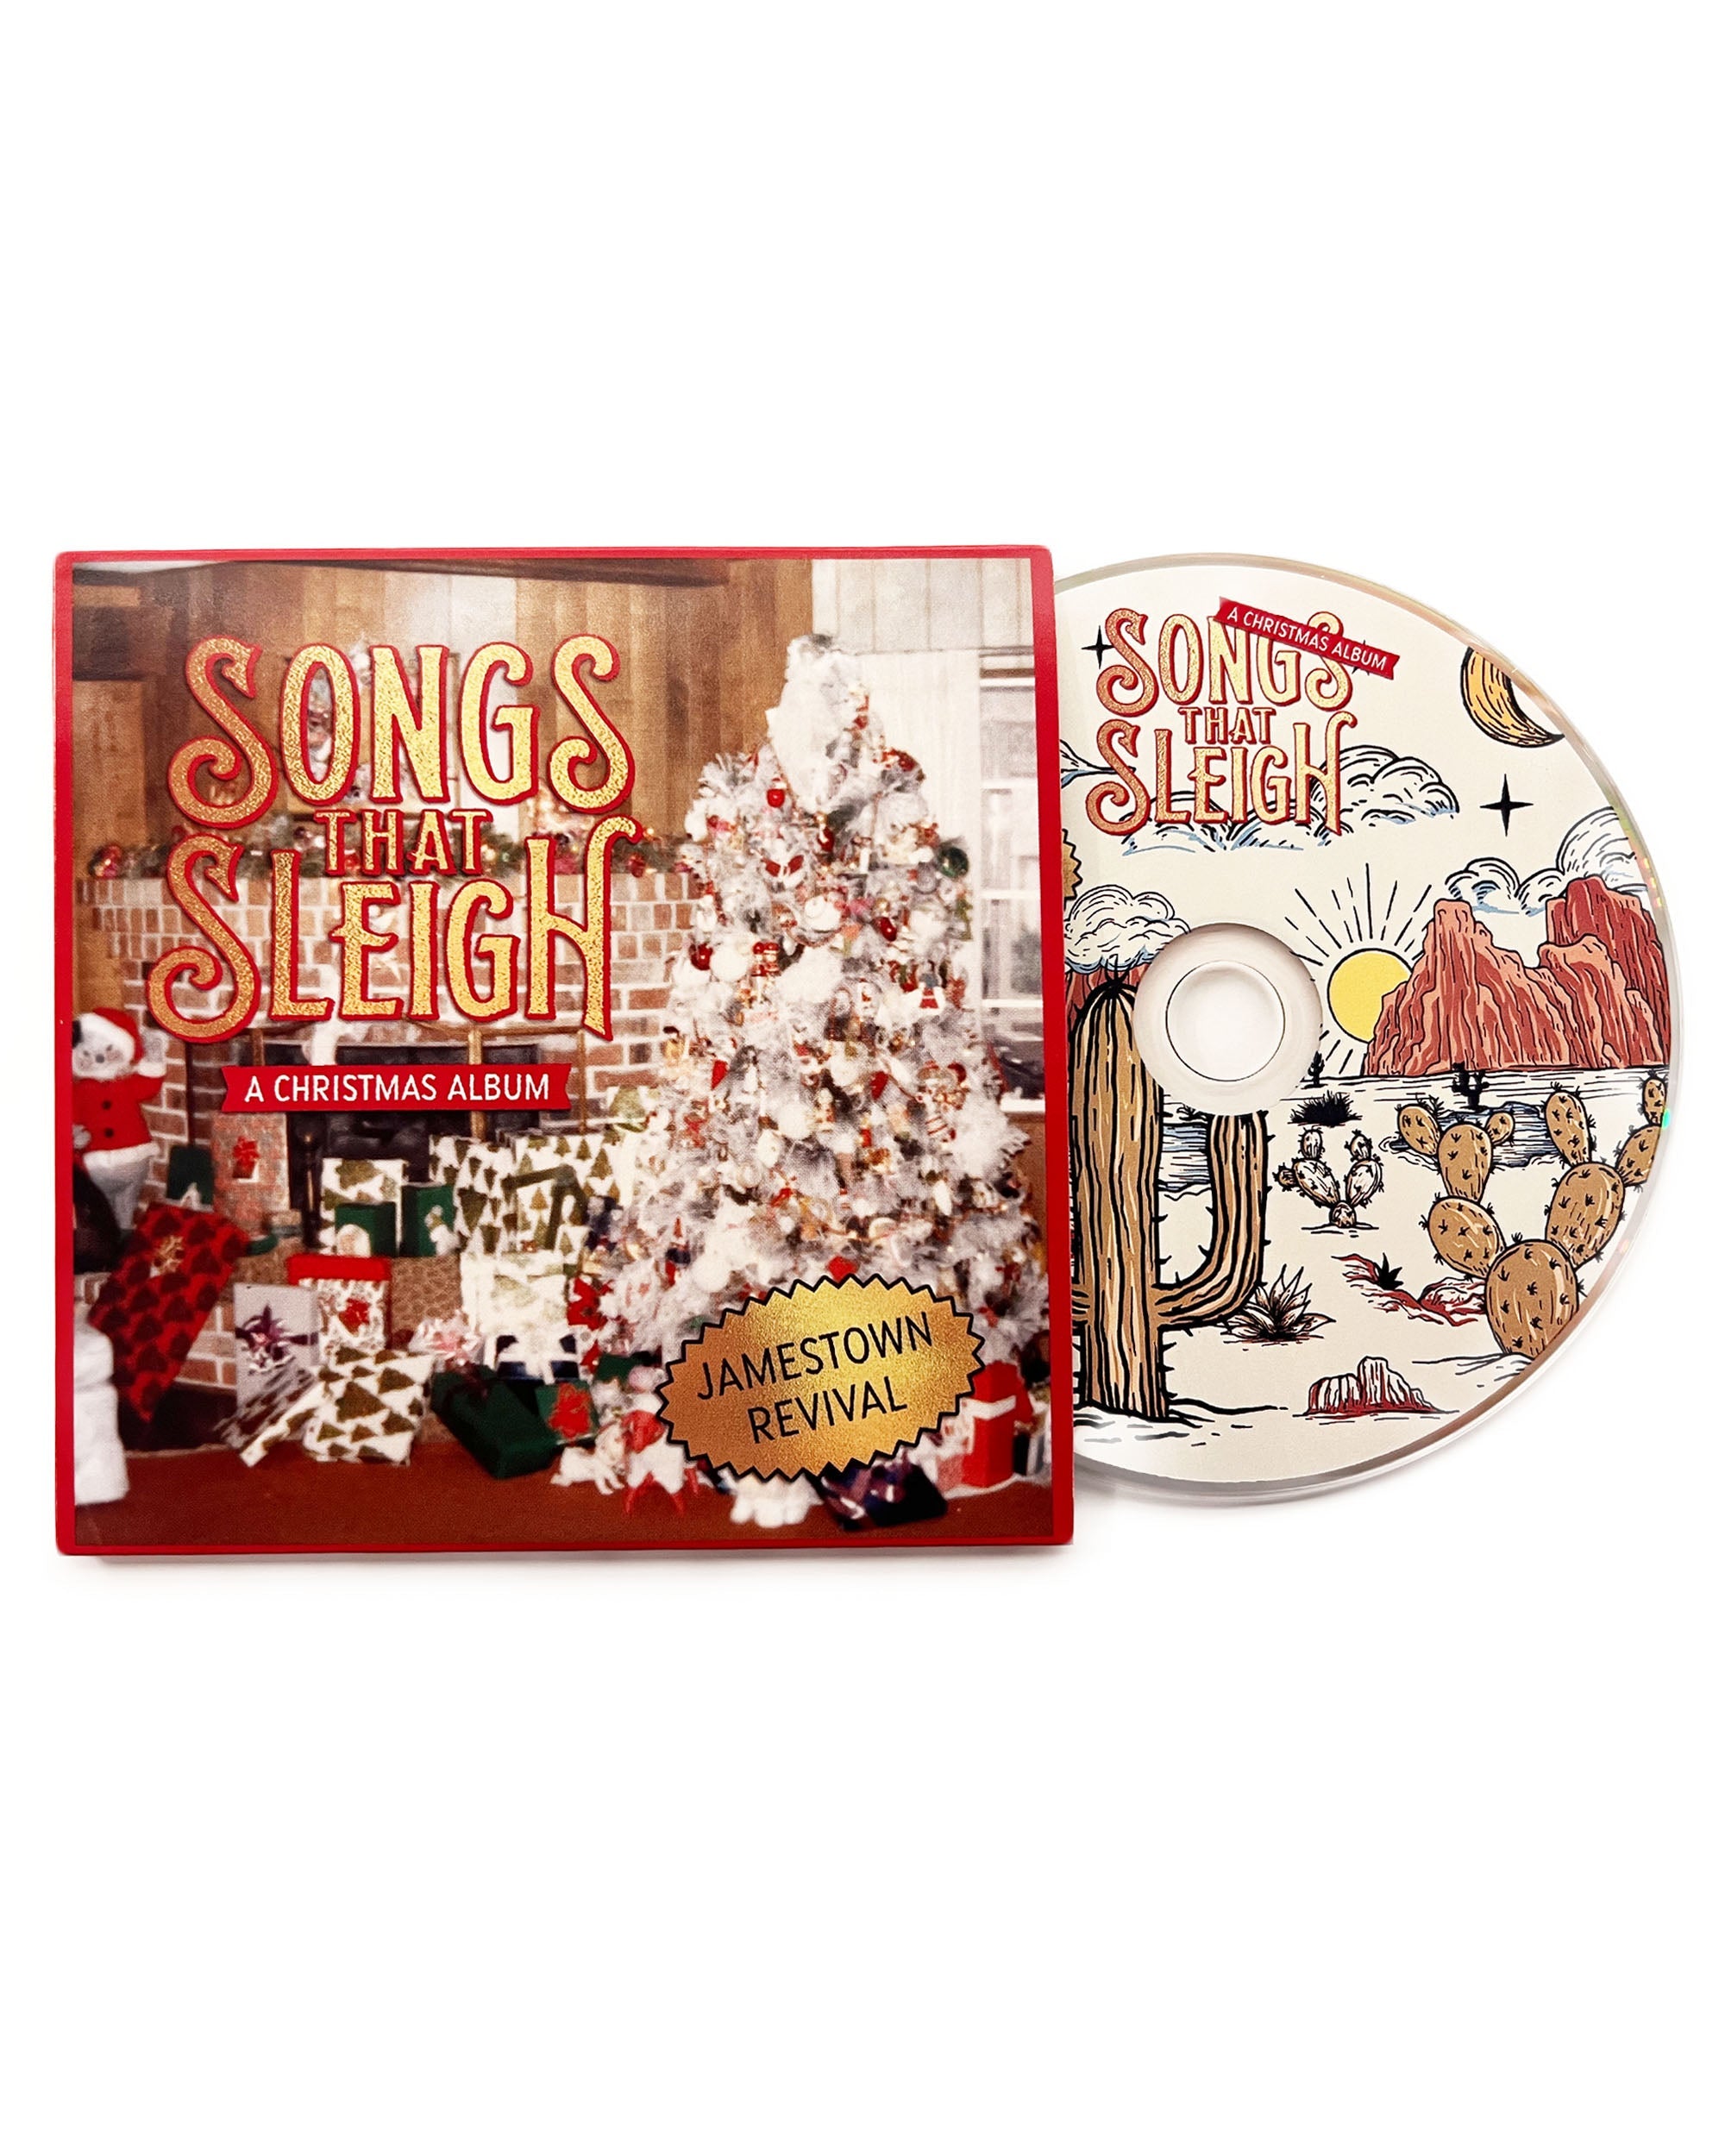 LIMITED EDITION 'Songs That Sleigh' SIGNED CD